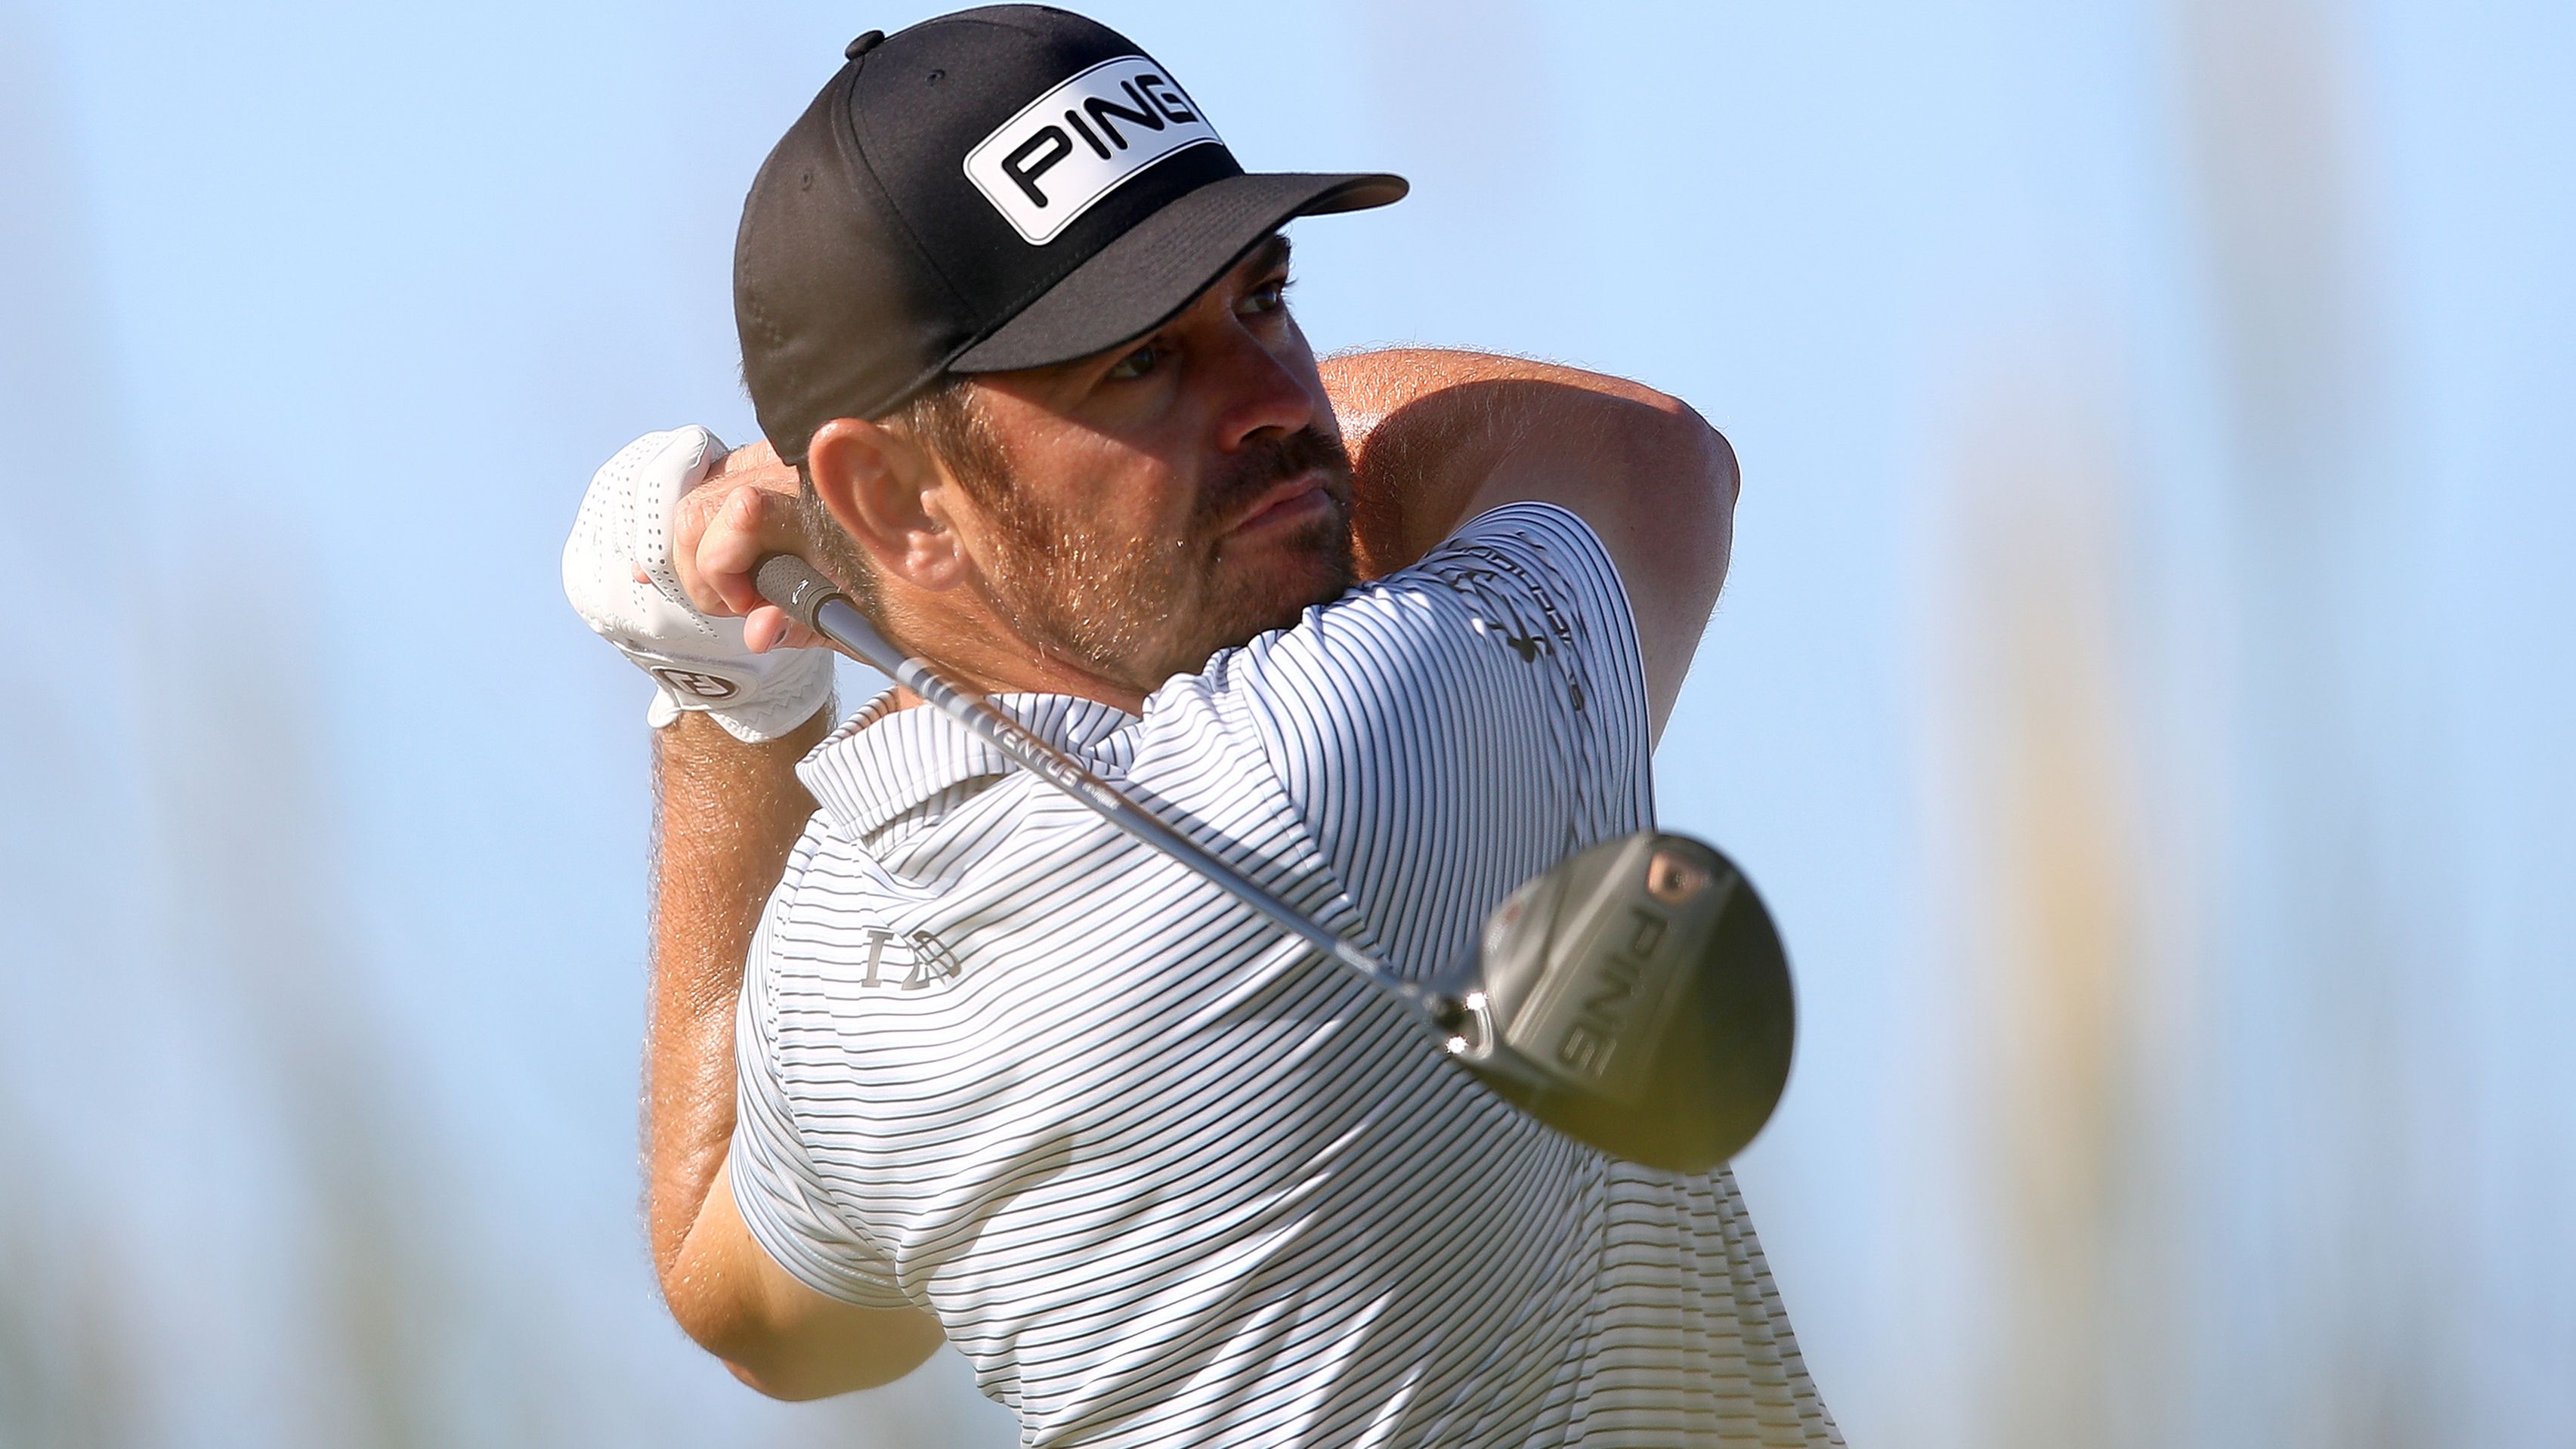 Louis Oosthuizen steadies to take one-shot lead into Open Championship final round